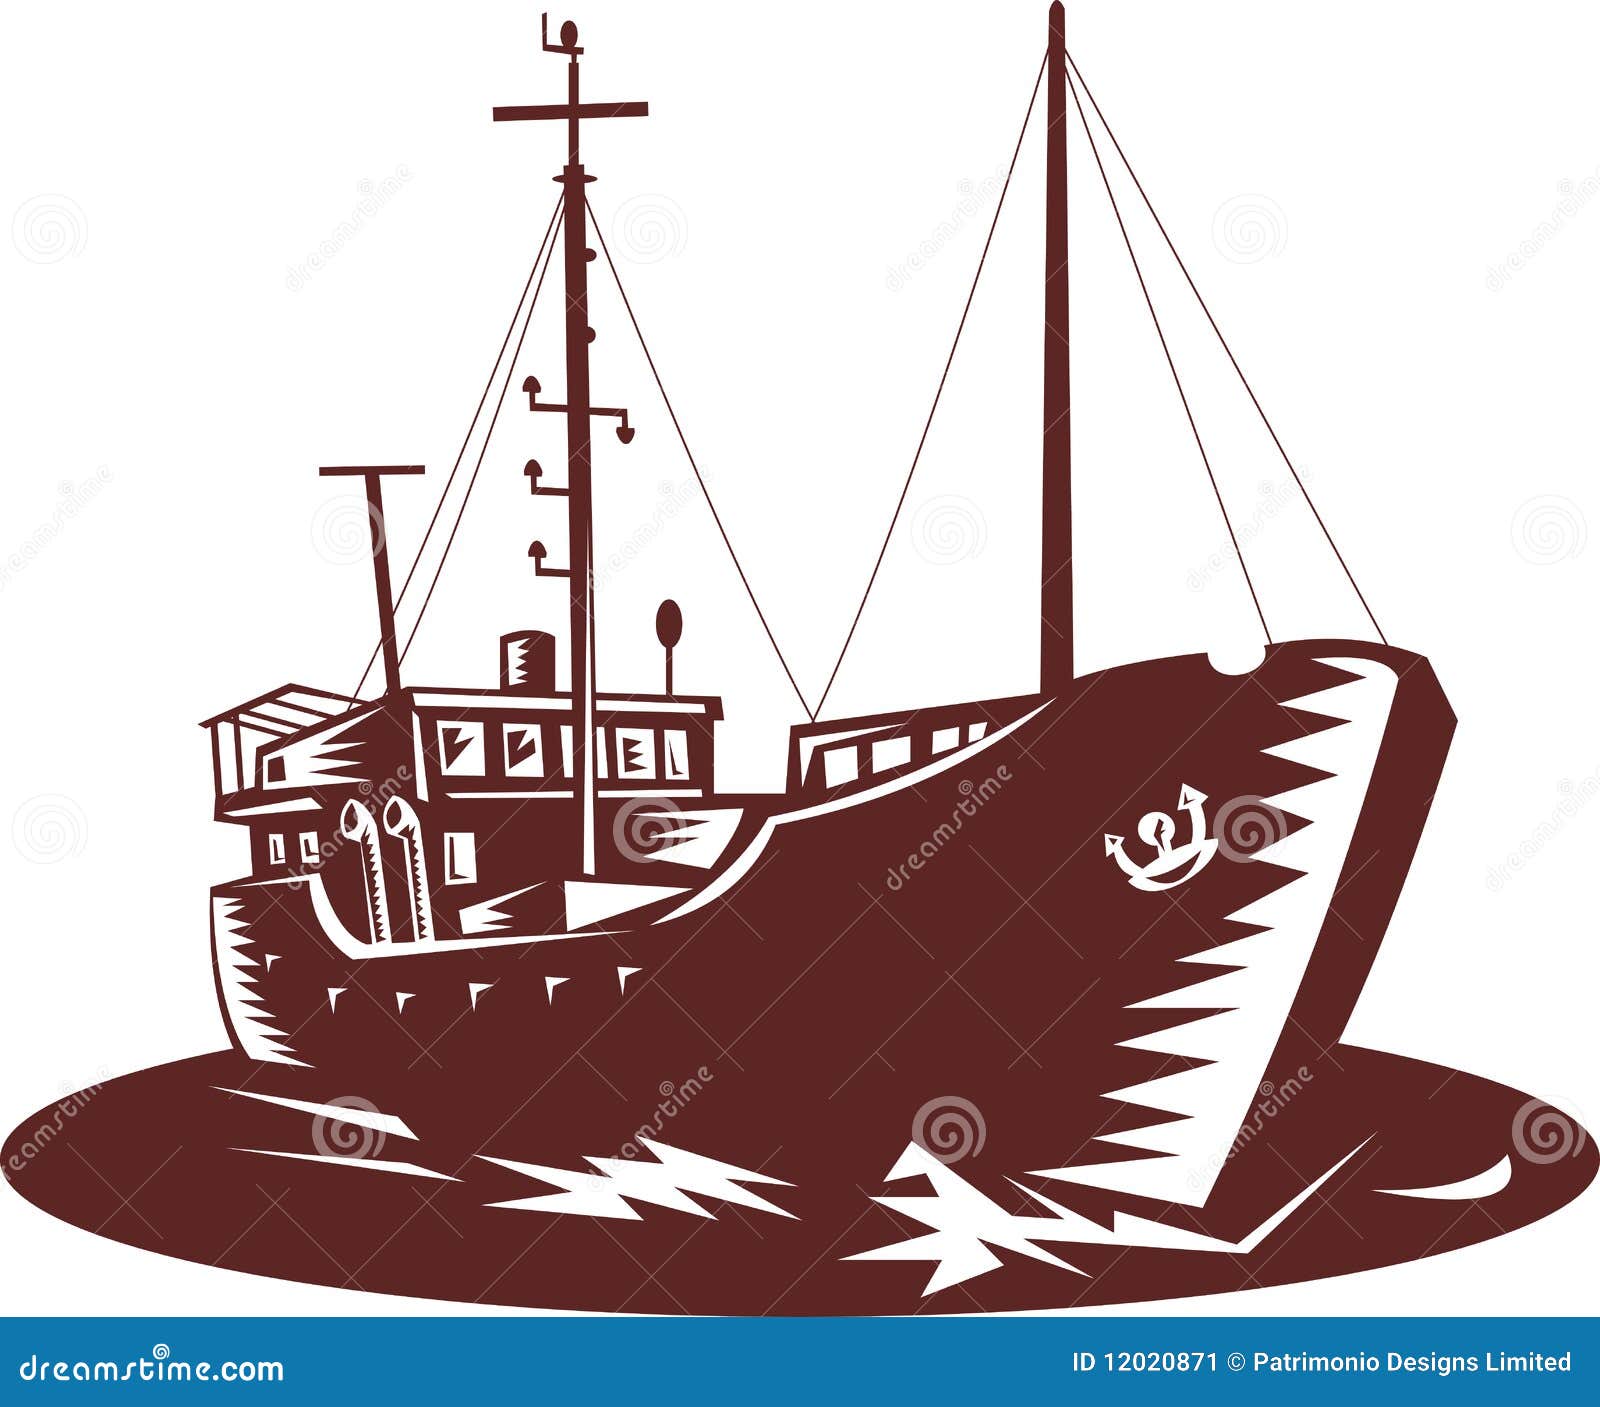 Illustration of a Coastal trader boat done in woodcut style.